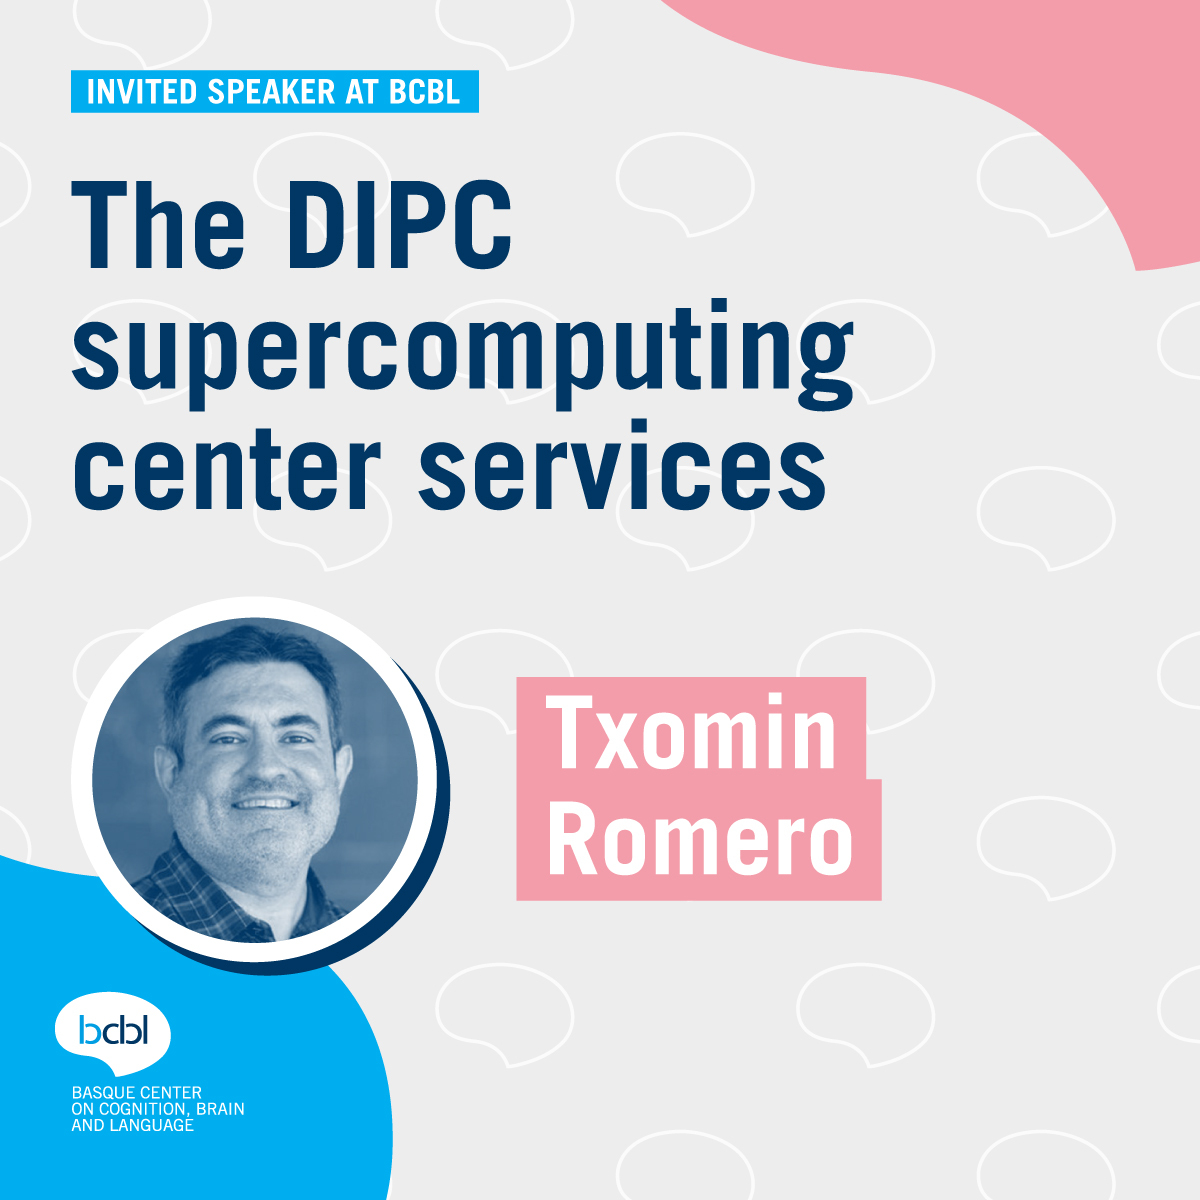 🗣️We have invited Txomin Romero, head of Supercomputing Center on @DIPCehu to speak to us about the DIPC Supercomputing Center services We are eager to learn more! Discover more about his research here👇 bcbl.eu/es/noticias/po…